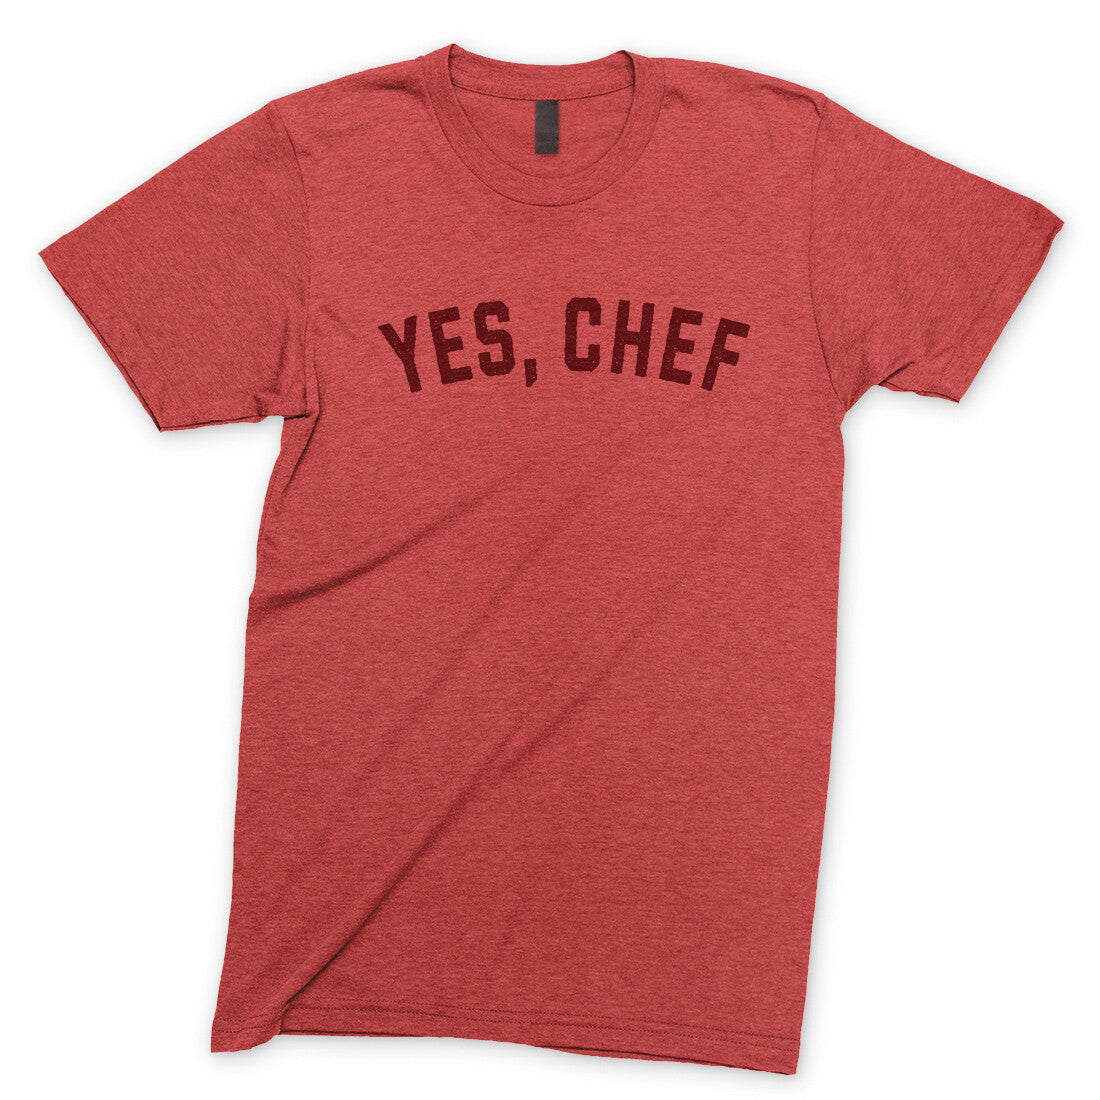 Yes Chef in Heather Red Color